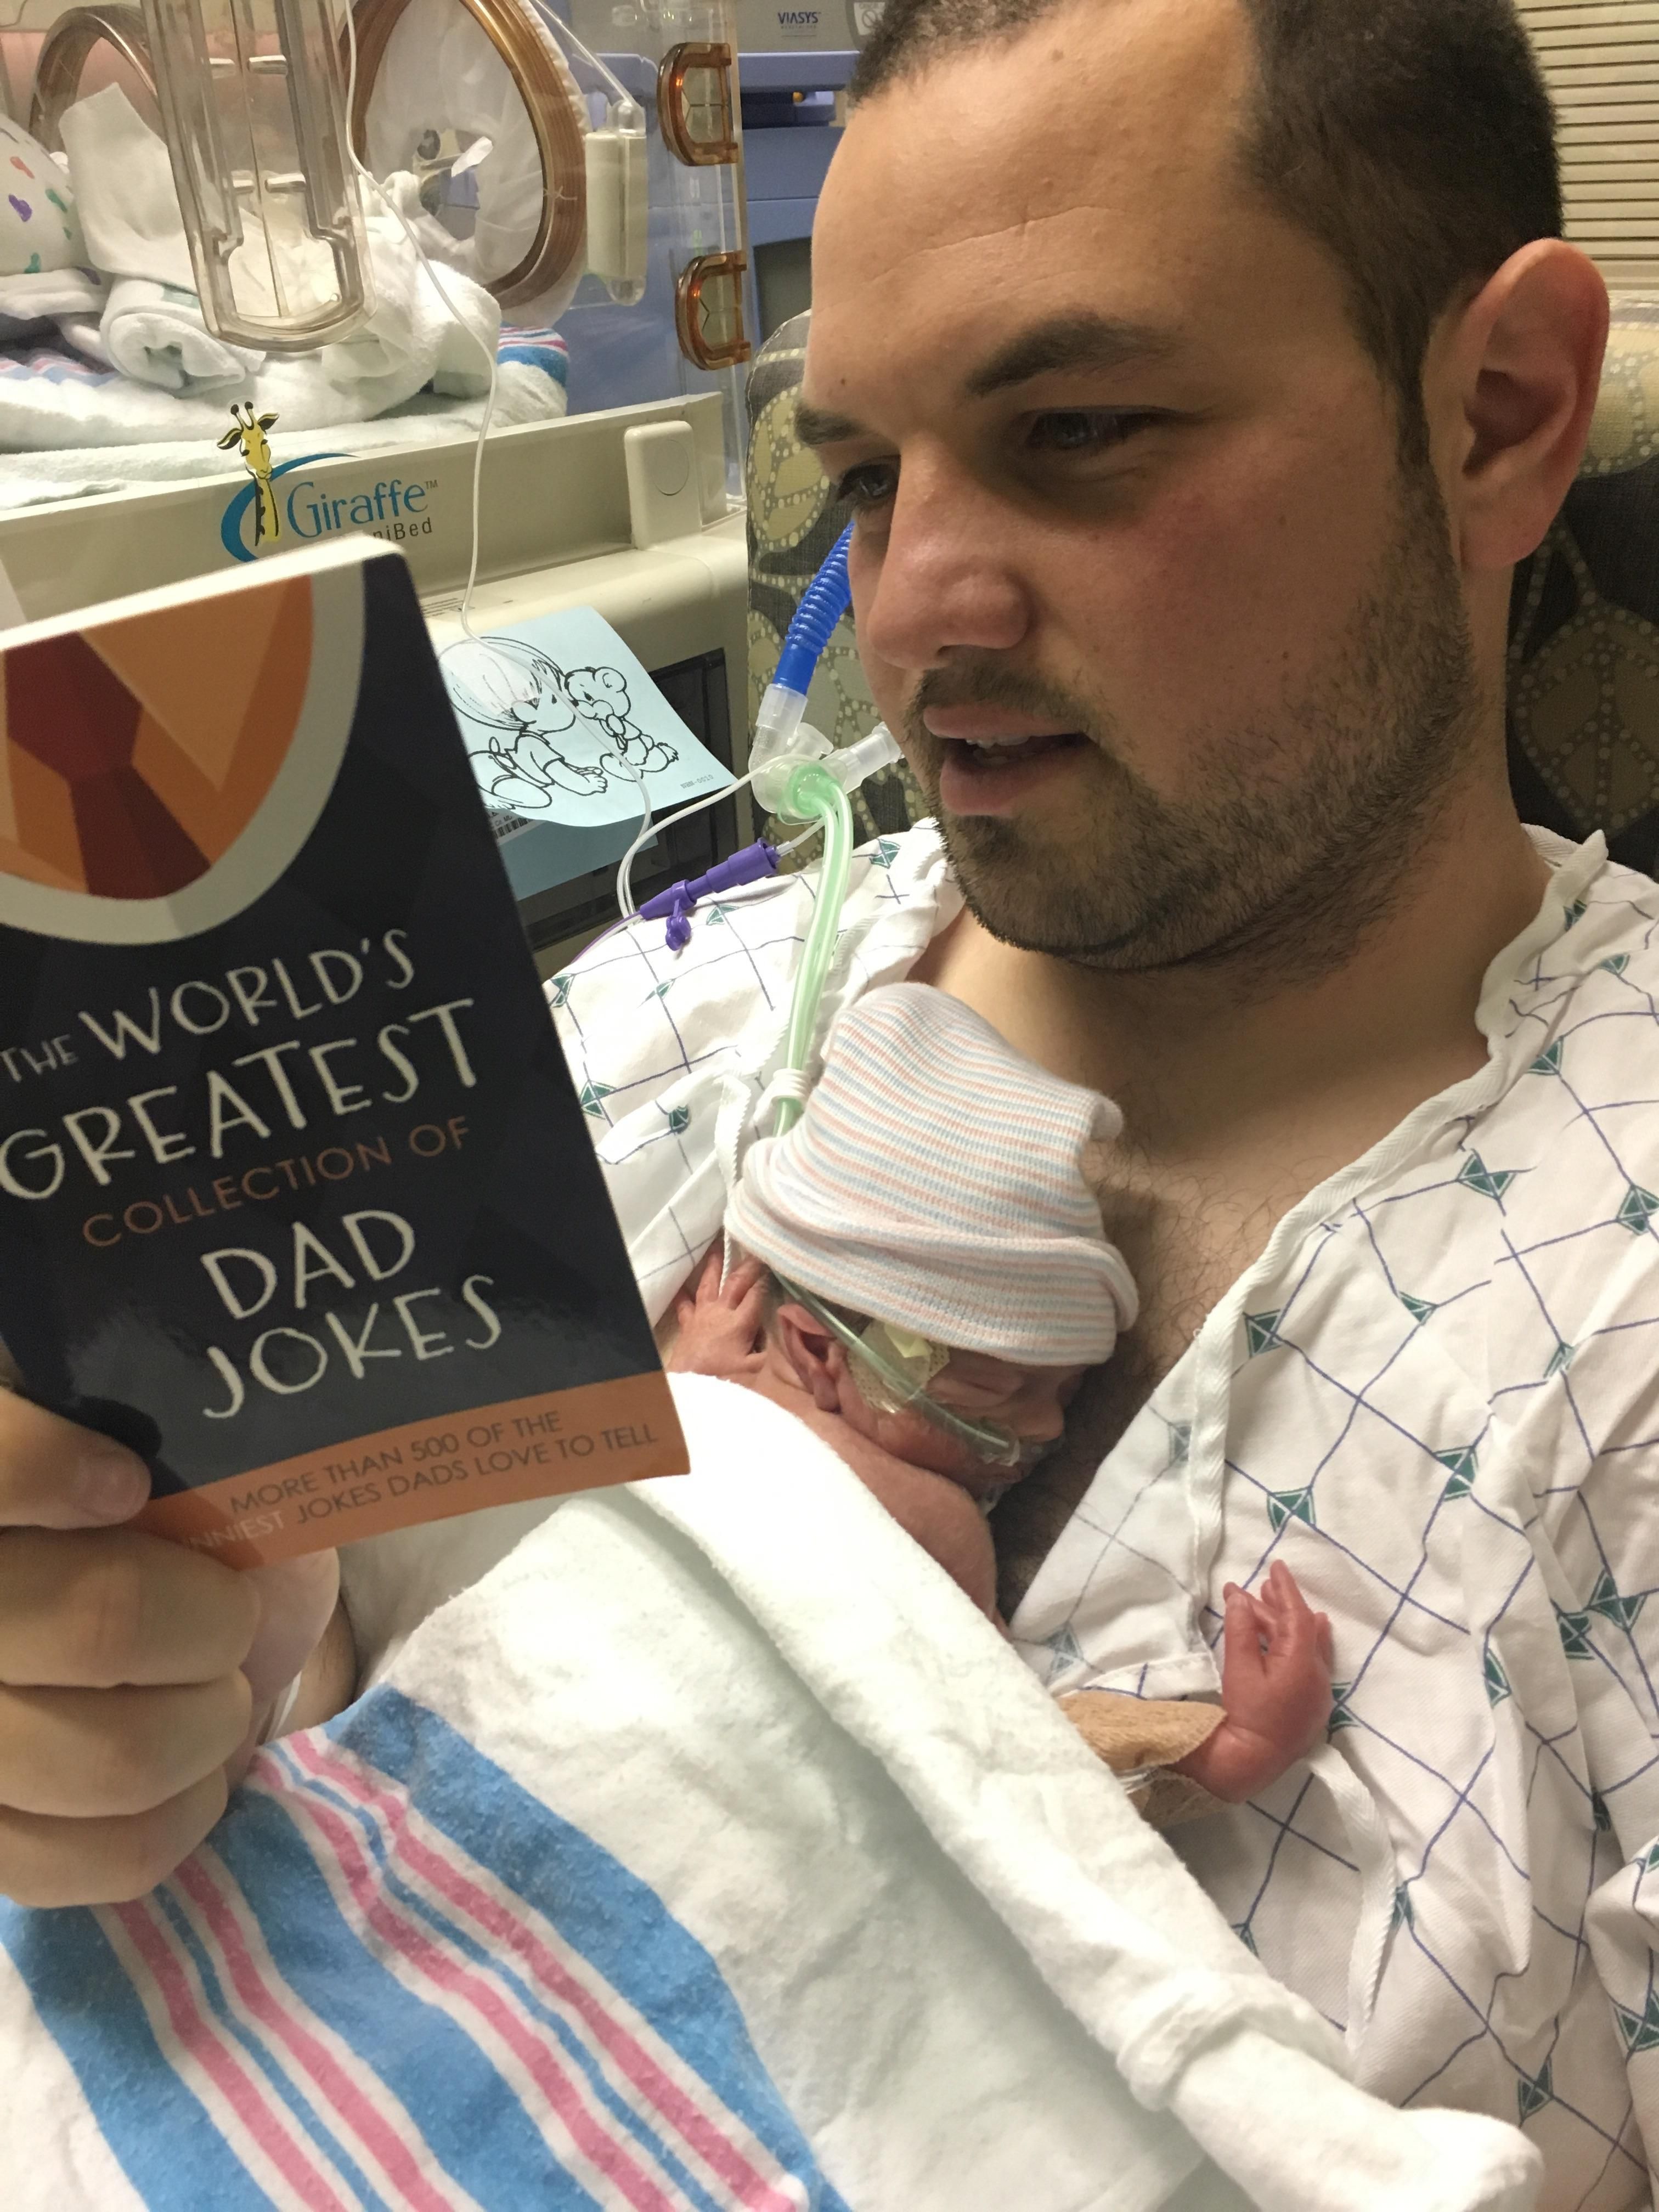 My son is 7 days old and in the NICU. I got to hold him and read to him for the first time. You can almost hear the “Ugh. Dad. Stopppp”